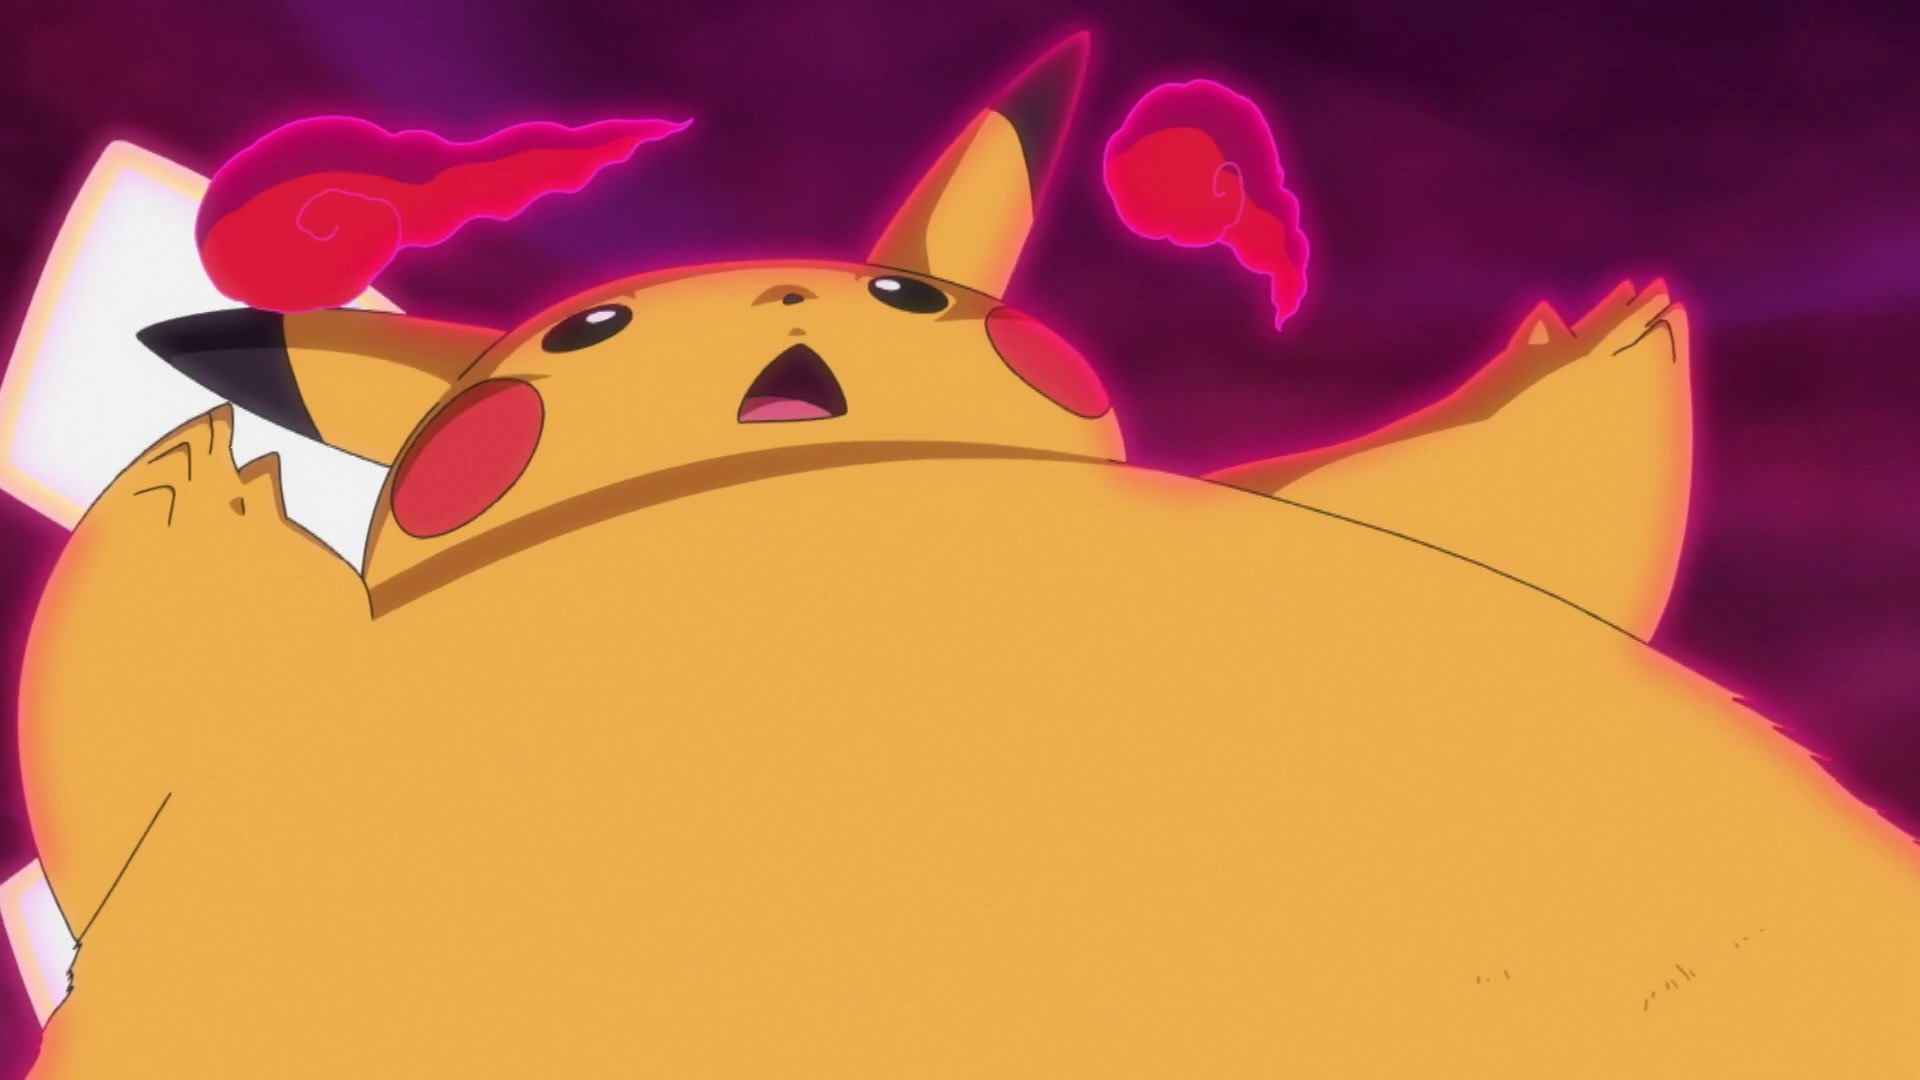 Ash S Pikachu Gigantamax Evolved In The Anime And Was A Big Boy Again